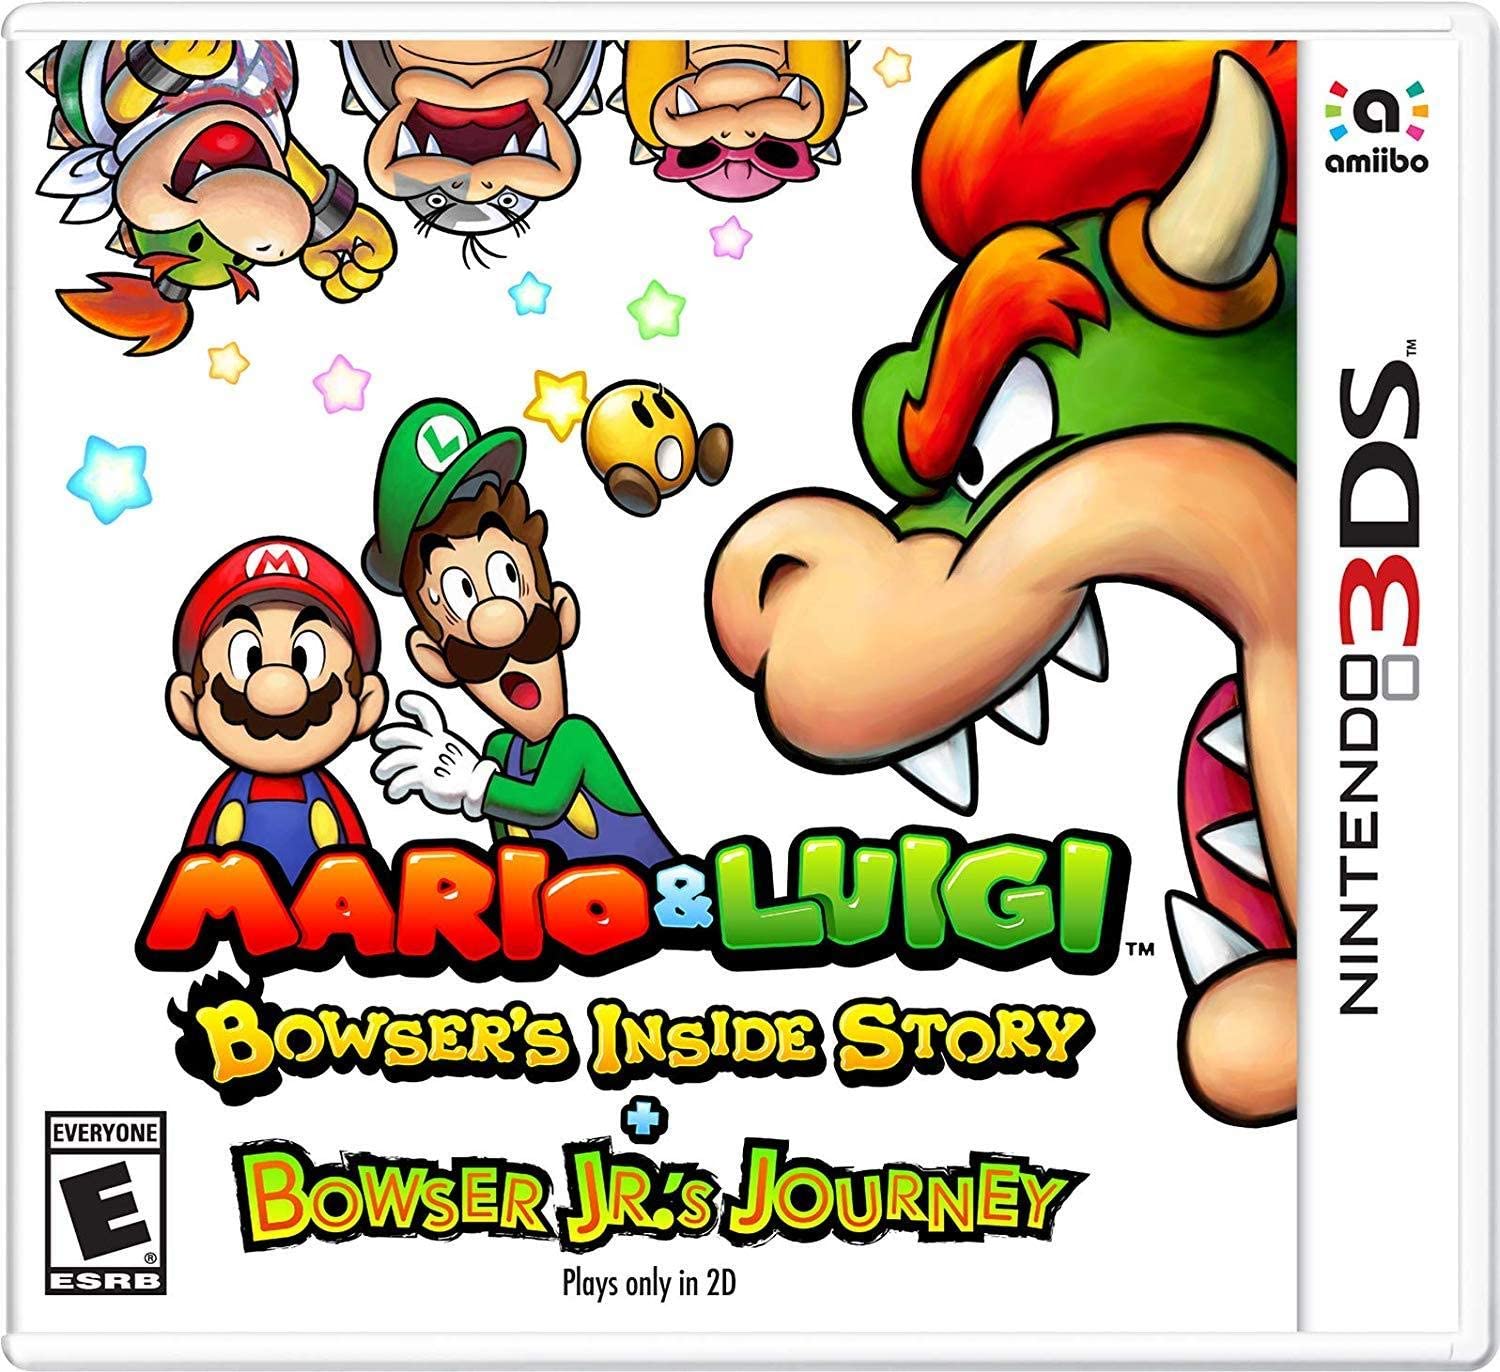 Mario and Luigi Bowsers Inside Story Bowser Jr Journey